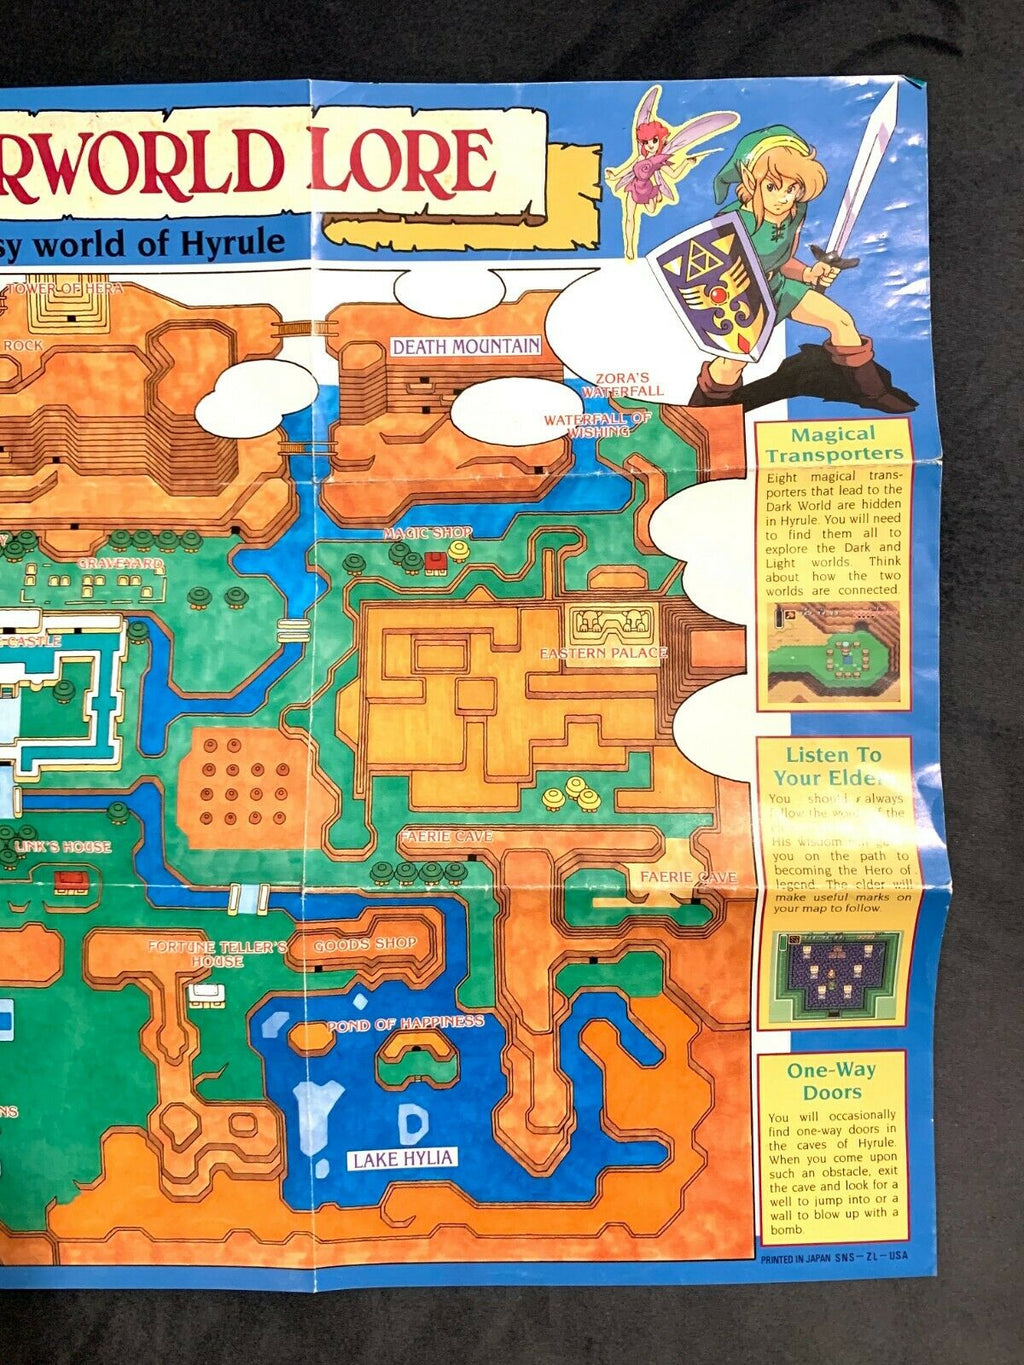 The Legend of Zelda: A Link to the Past - House of Books Map (Labeled) -  SNES Super Nintendo